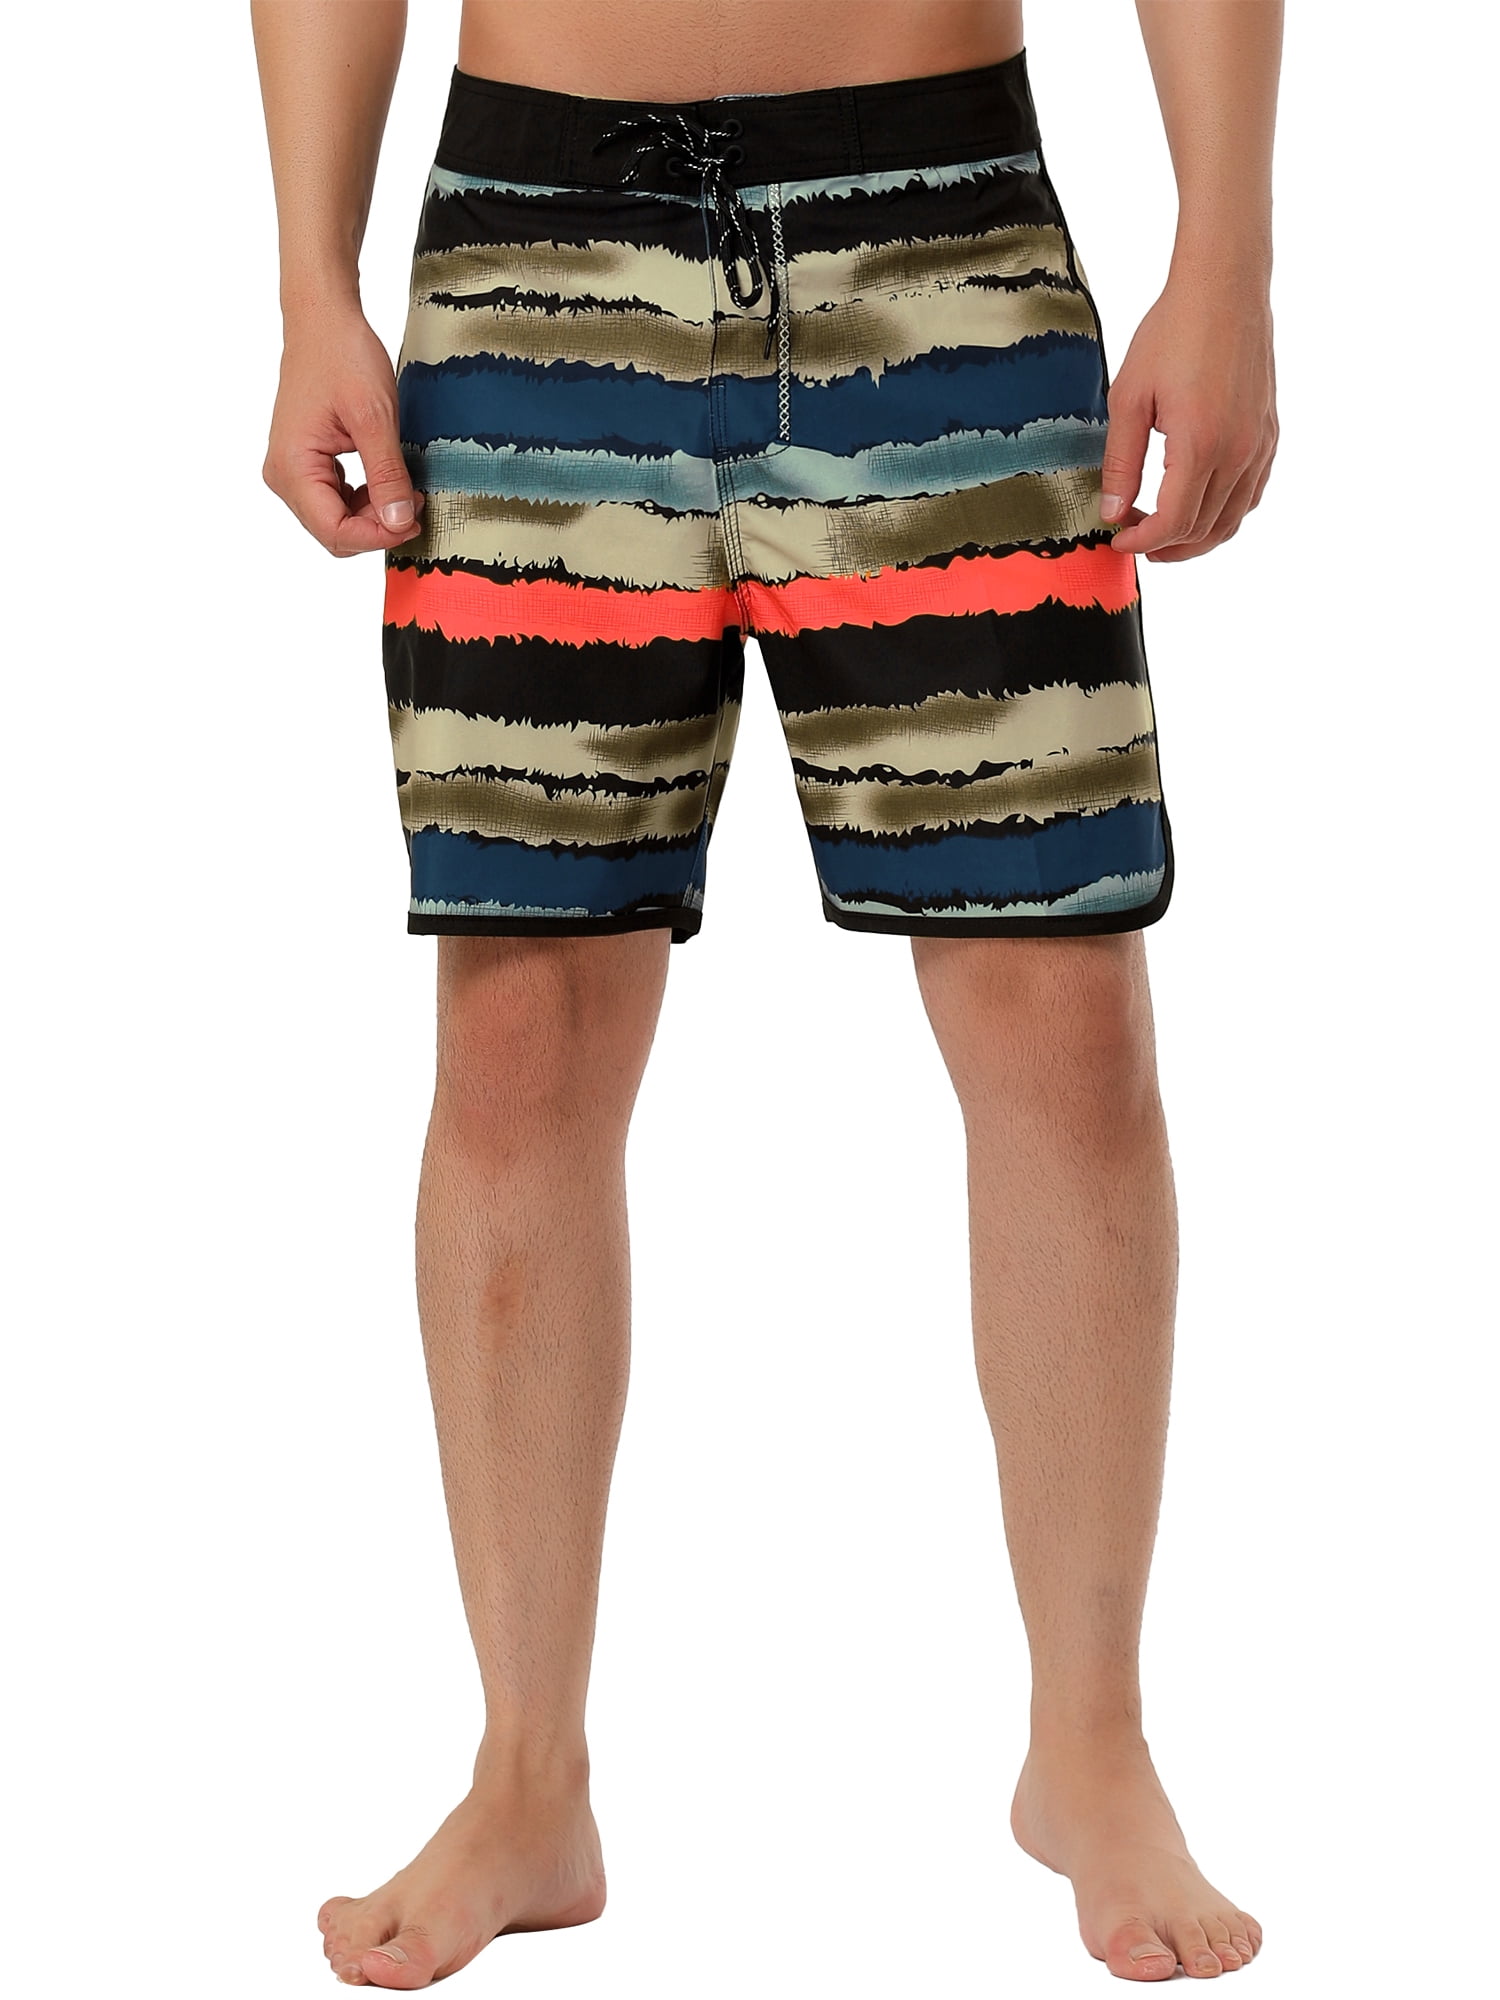 Snowflakes Mens Swim Trunks Quick Dry Beach Wear Drawstring Board Shorts WOJUEDE Colorful